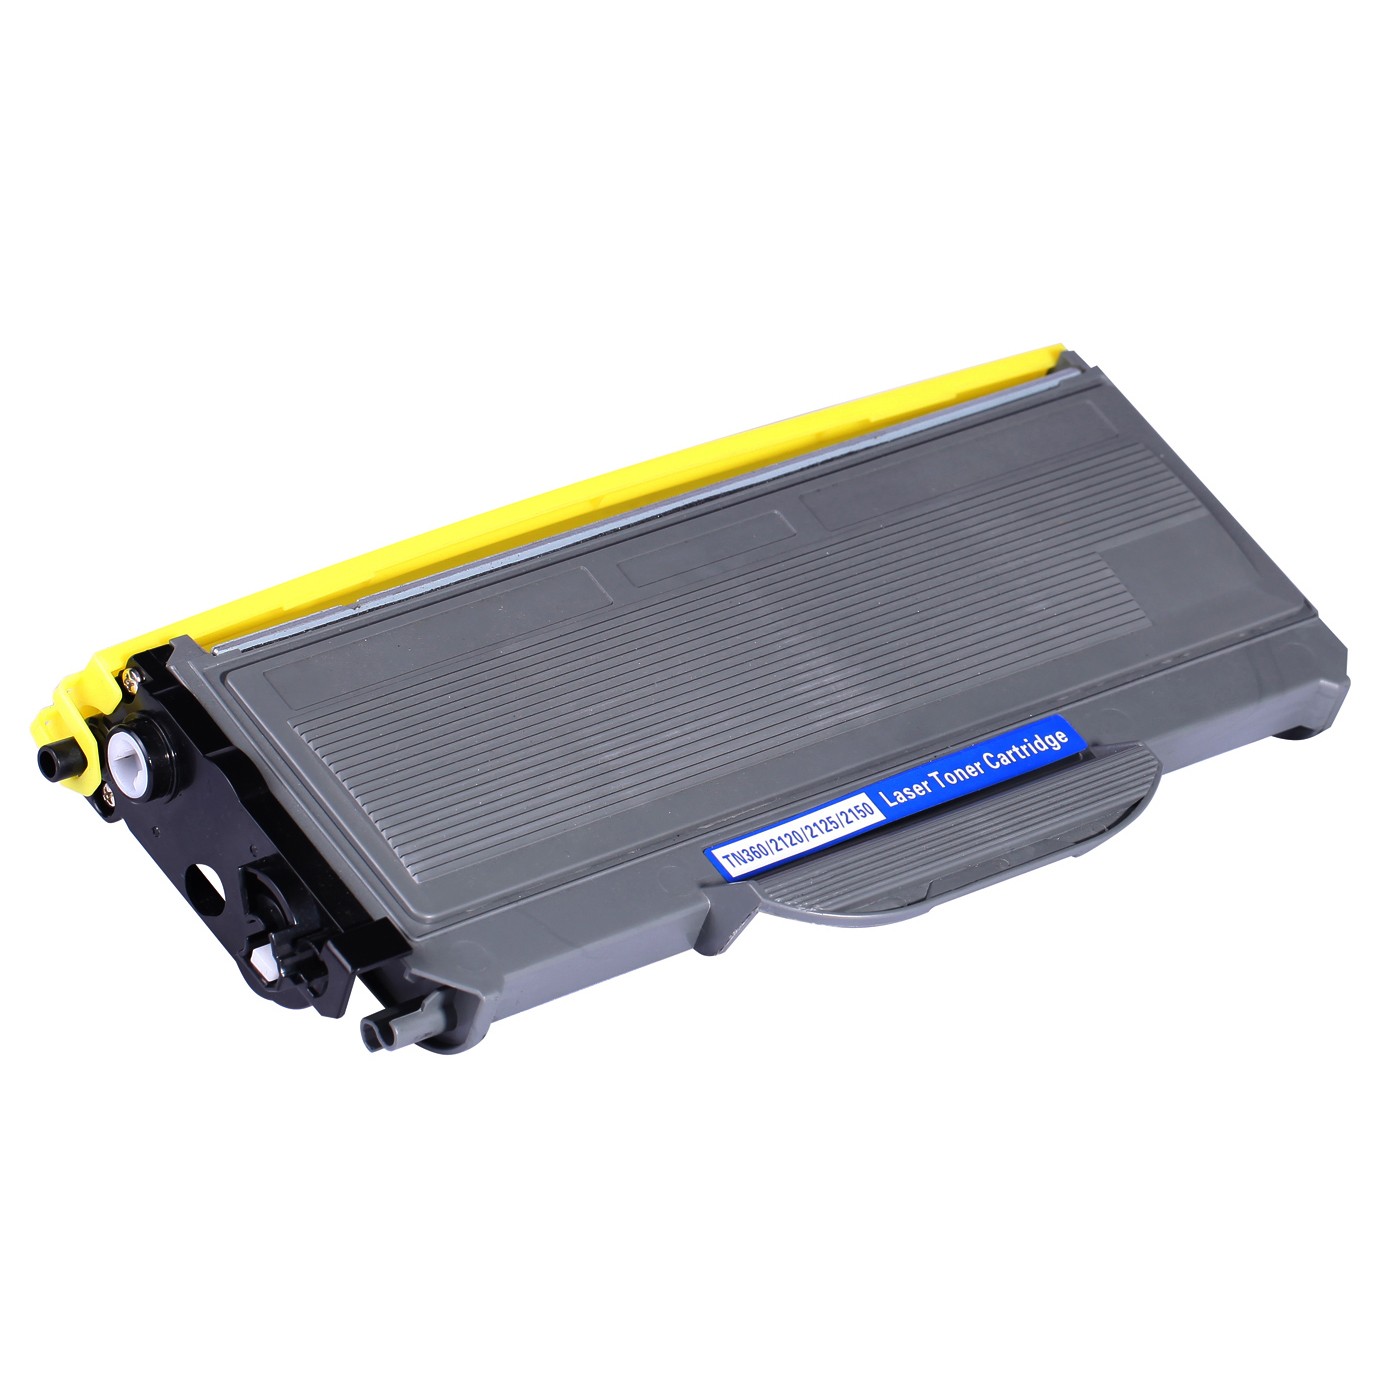 Compatible toner cartridge for Brother TN360/2120/2125/2150/26J